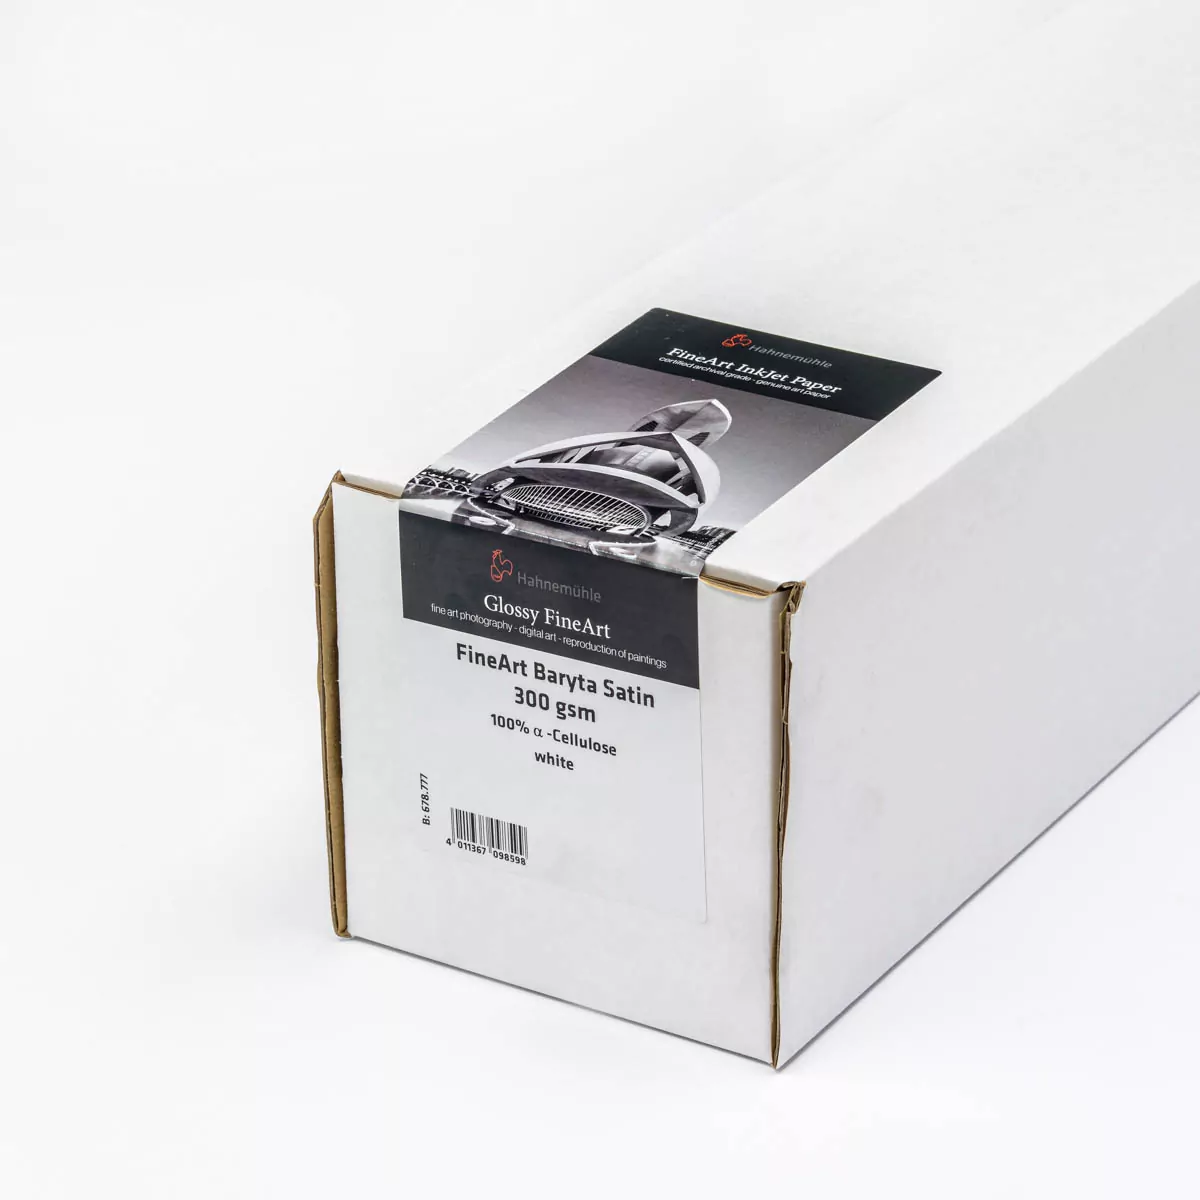 Hahnemuhle FineArt Baryta Satin 300gsm 44"(111cm)x12m roll